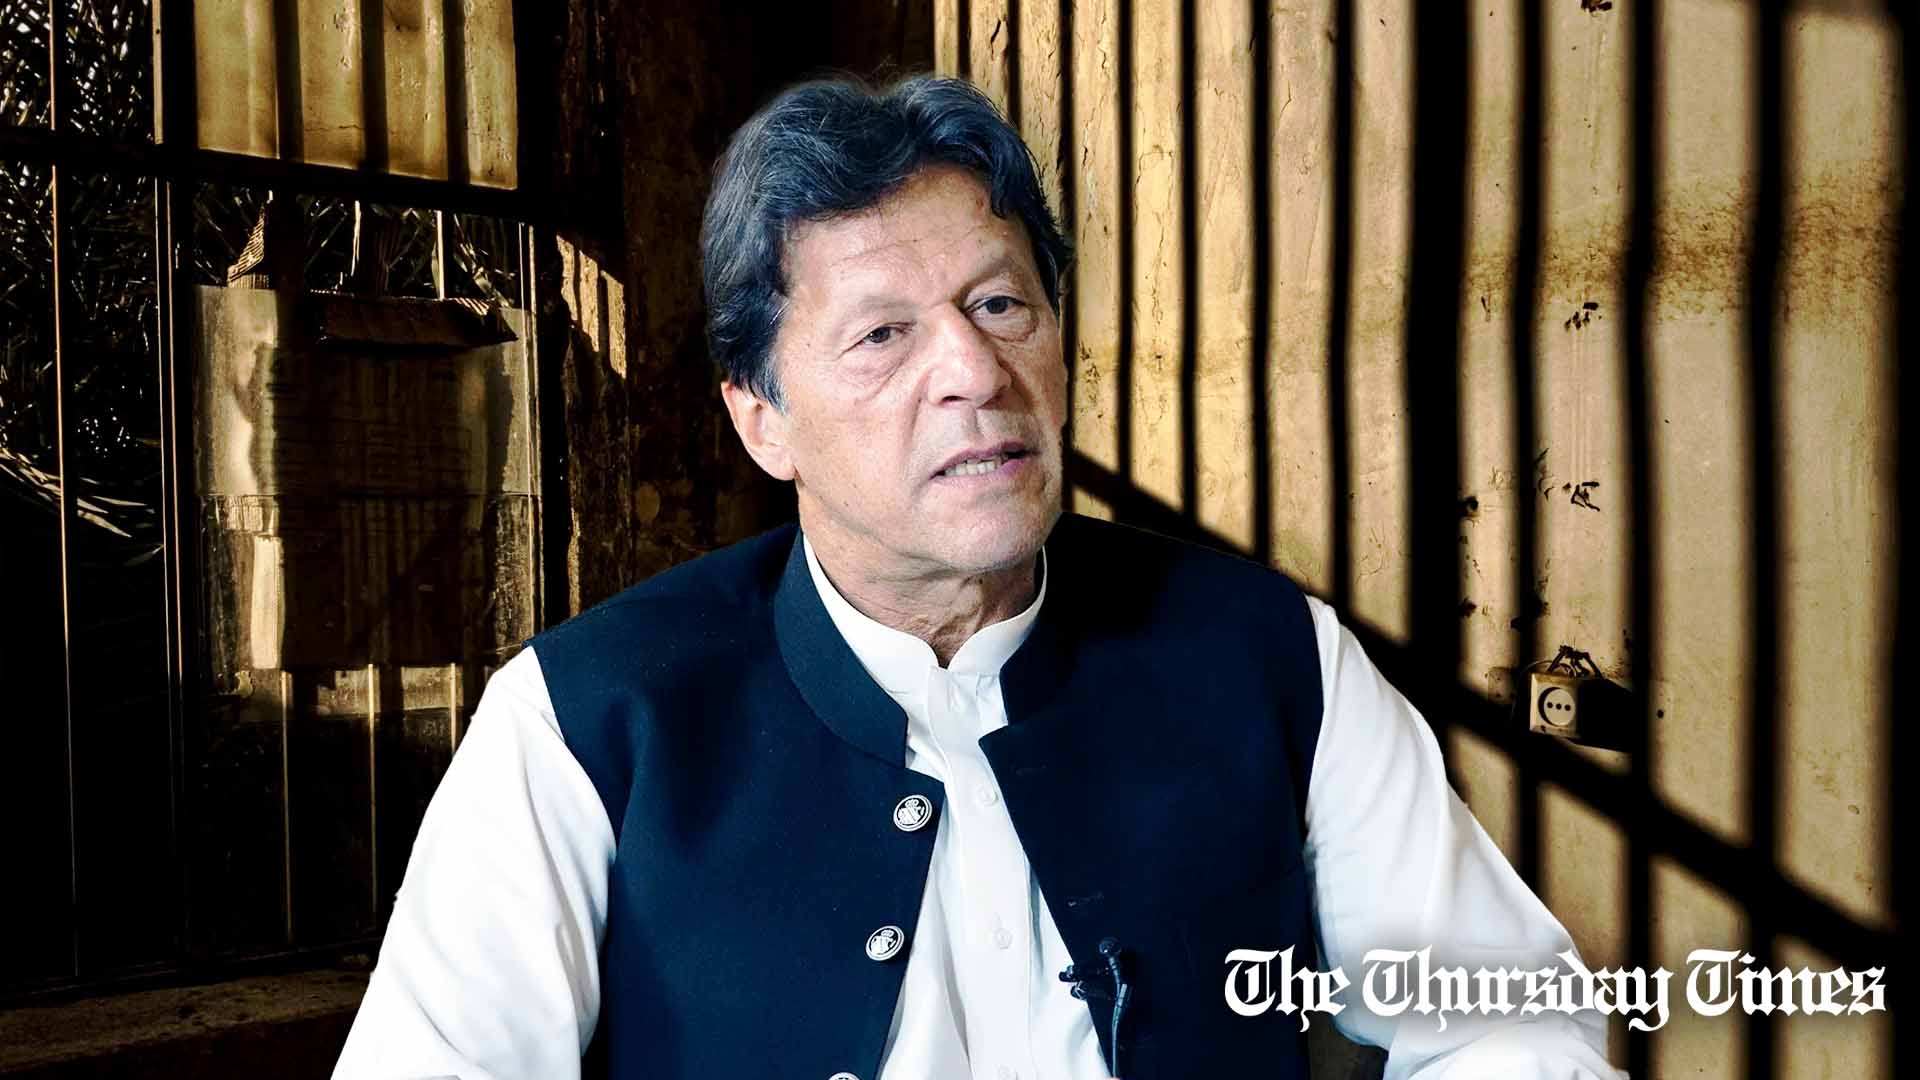 A file photo is shown of PTI supremo Imran Khan. — FILE/THE THURSDAY TIMES